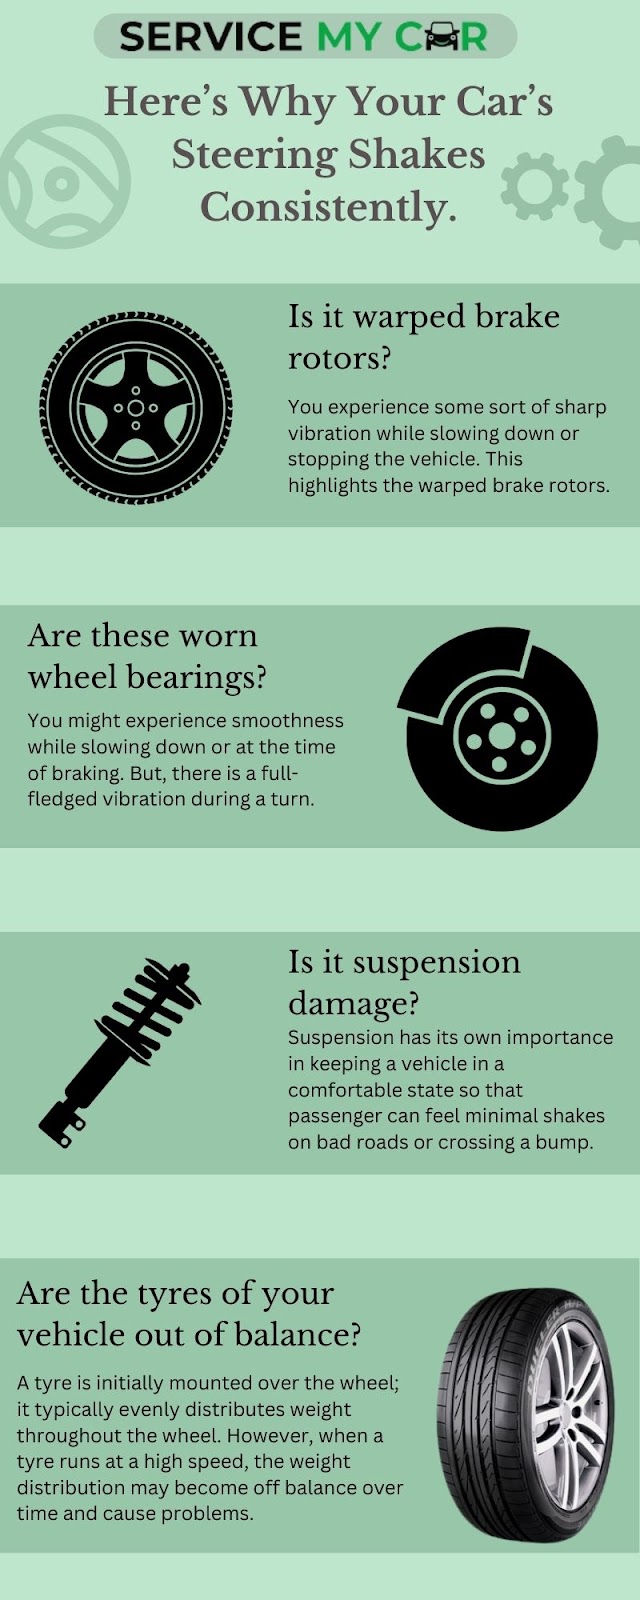 Here’s Why Your Car’s Steering Shakes Consistently.